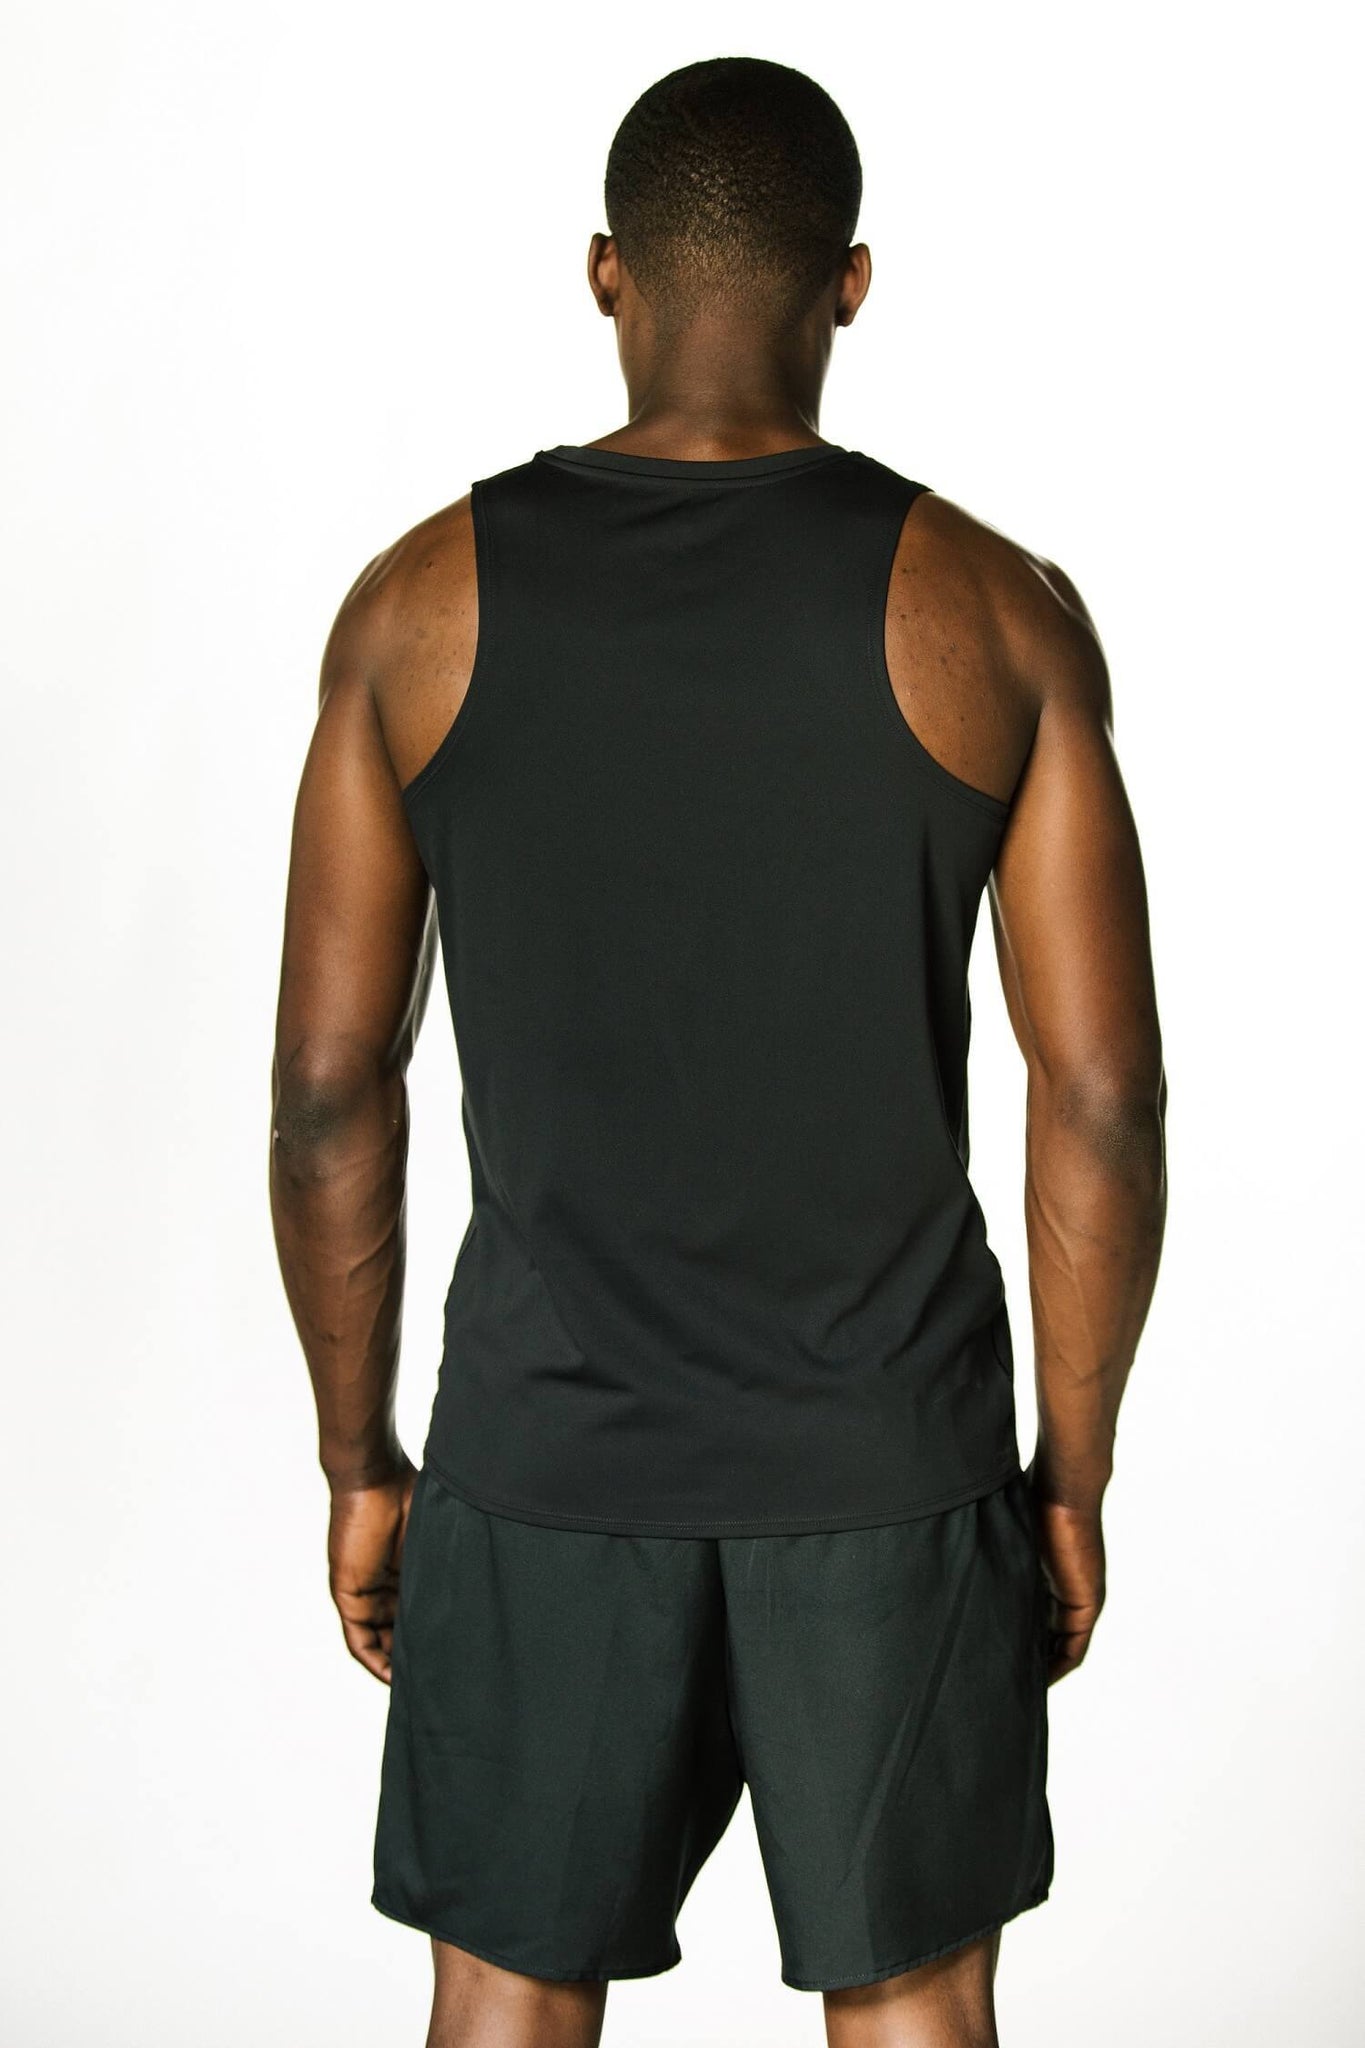 Ethically Made Fitness Tank Top Supplier